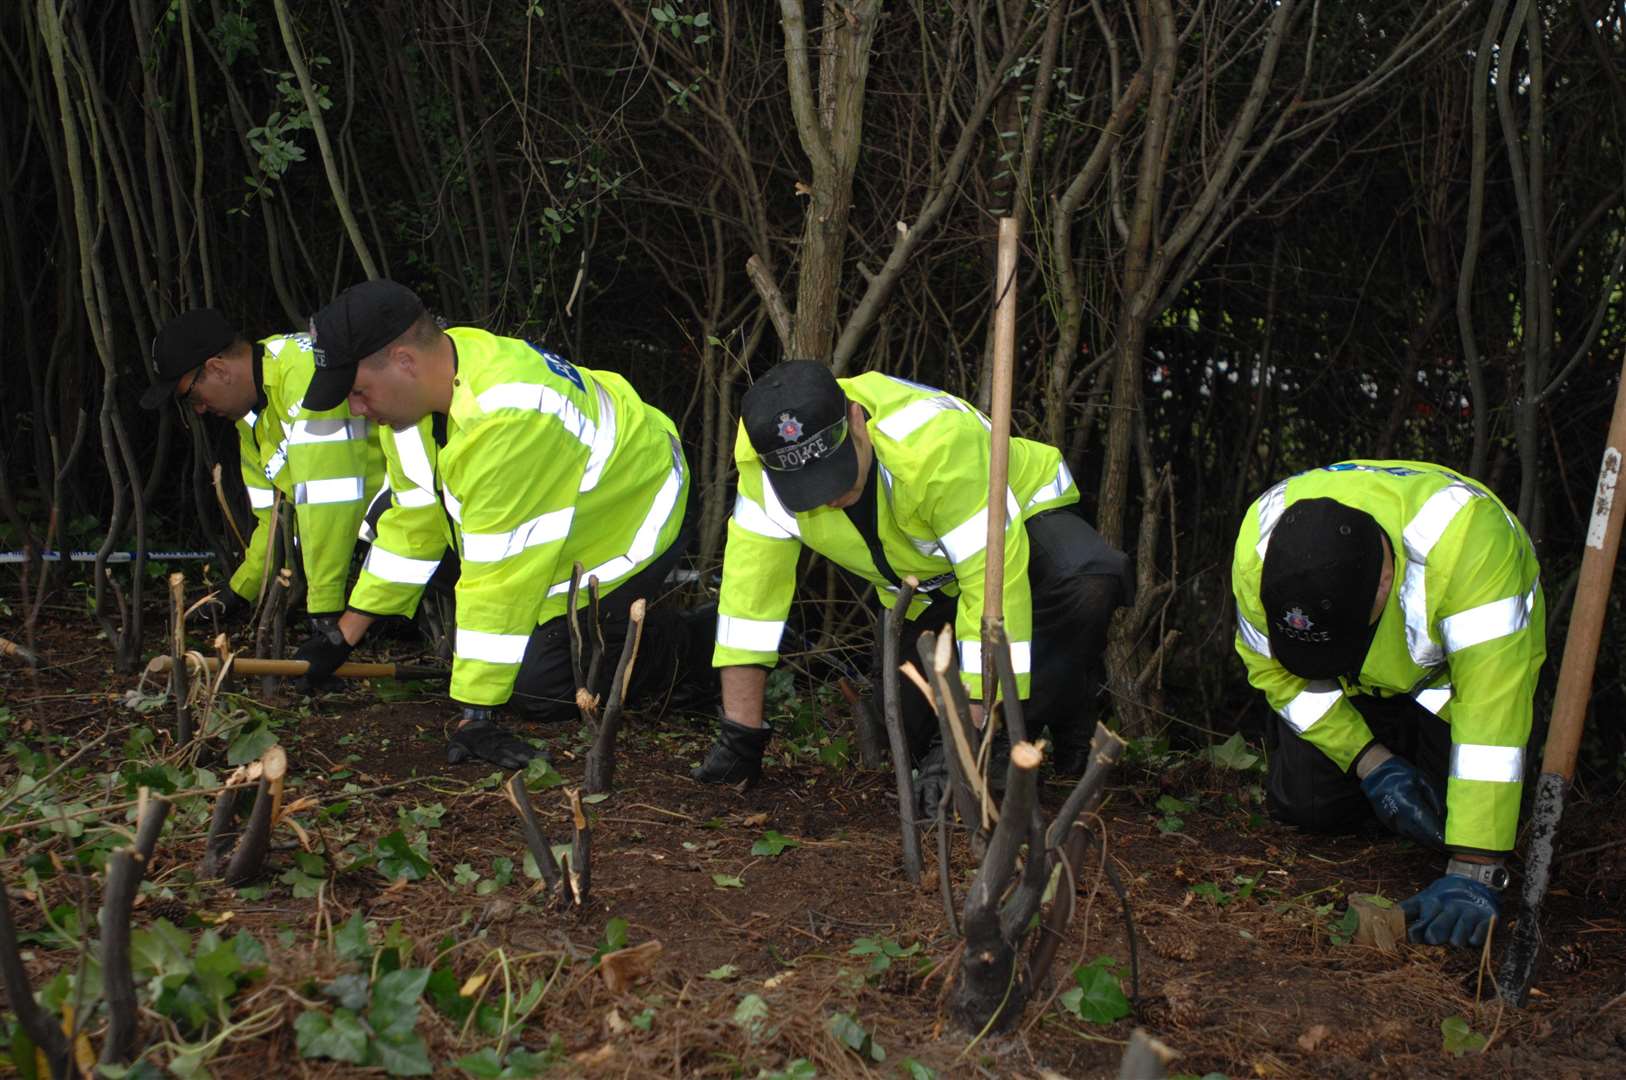 Police searching the area in 2007